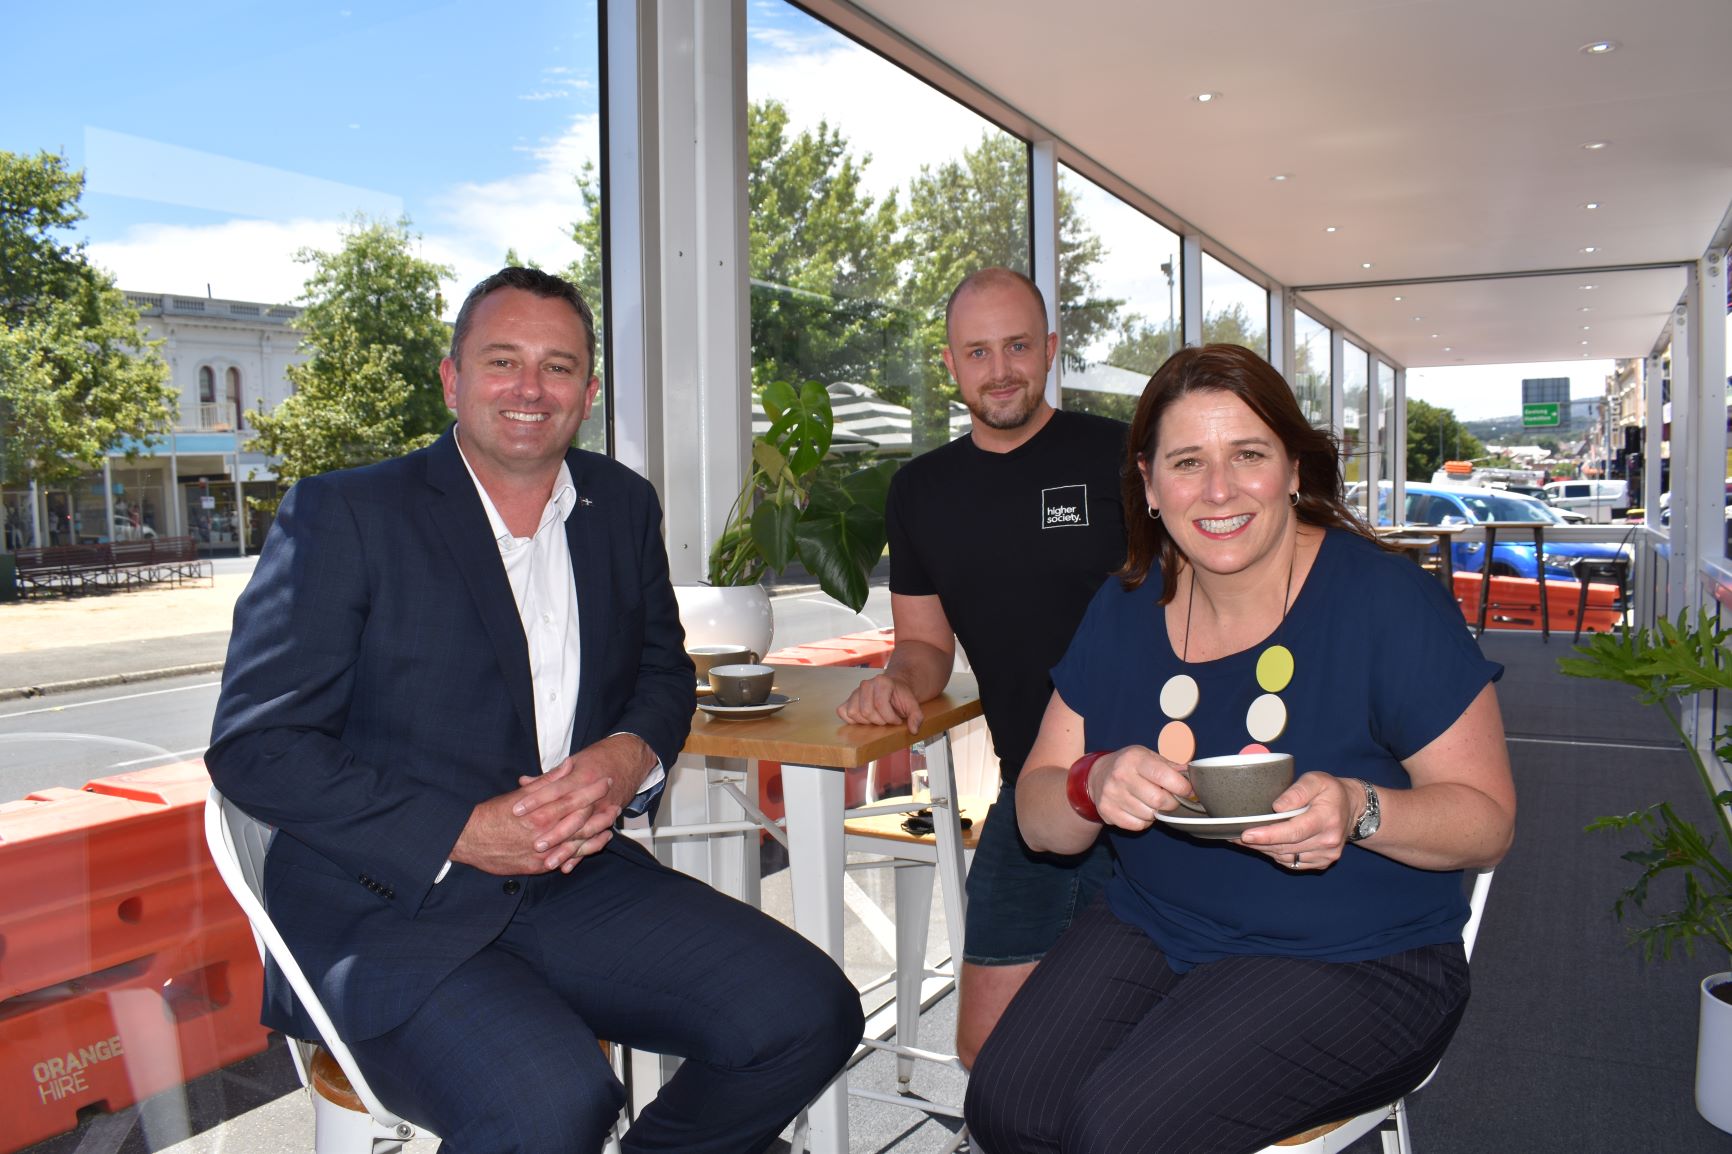 Mayor Daniel Moloney, Member for Wendouree Juliana Addison MP and Higher Society owner Rhys Jeffrey at the Sturt Street outdoor dining hub, 13 January 2021